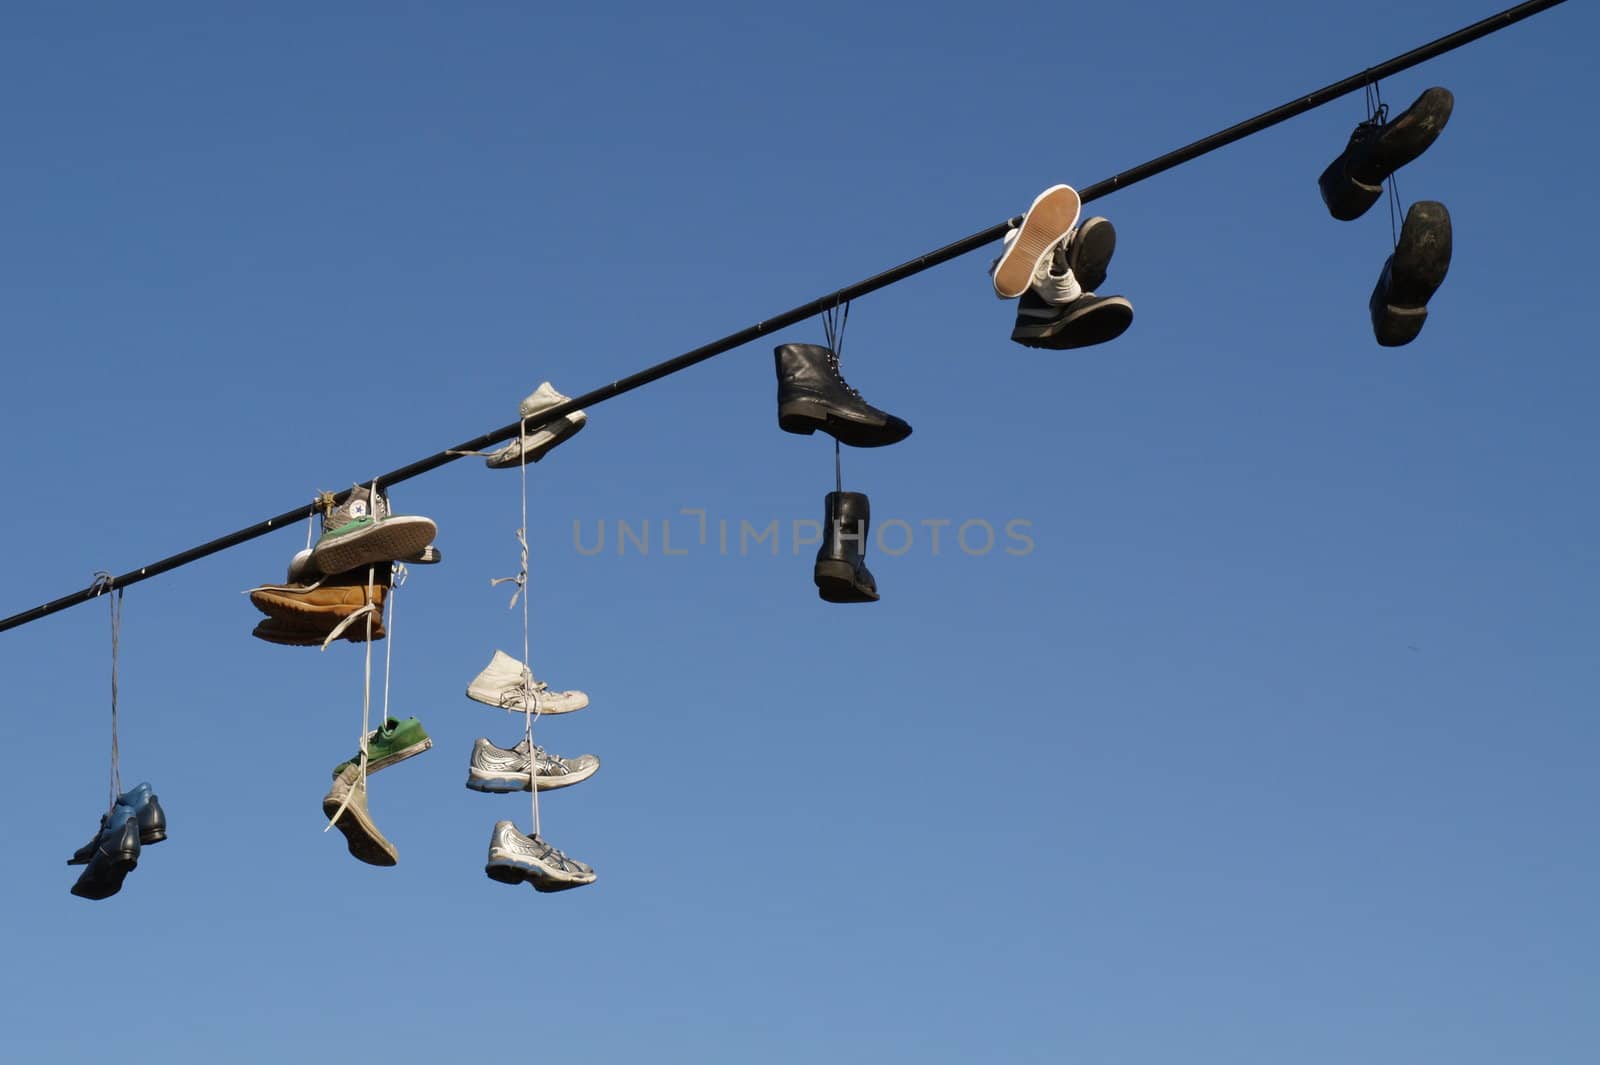 Shoes hanging on a cable by anderm